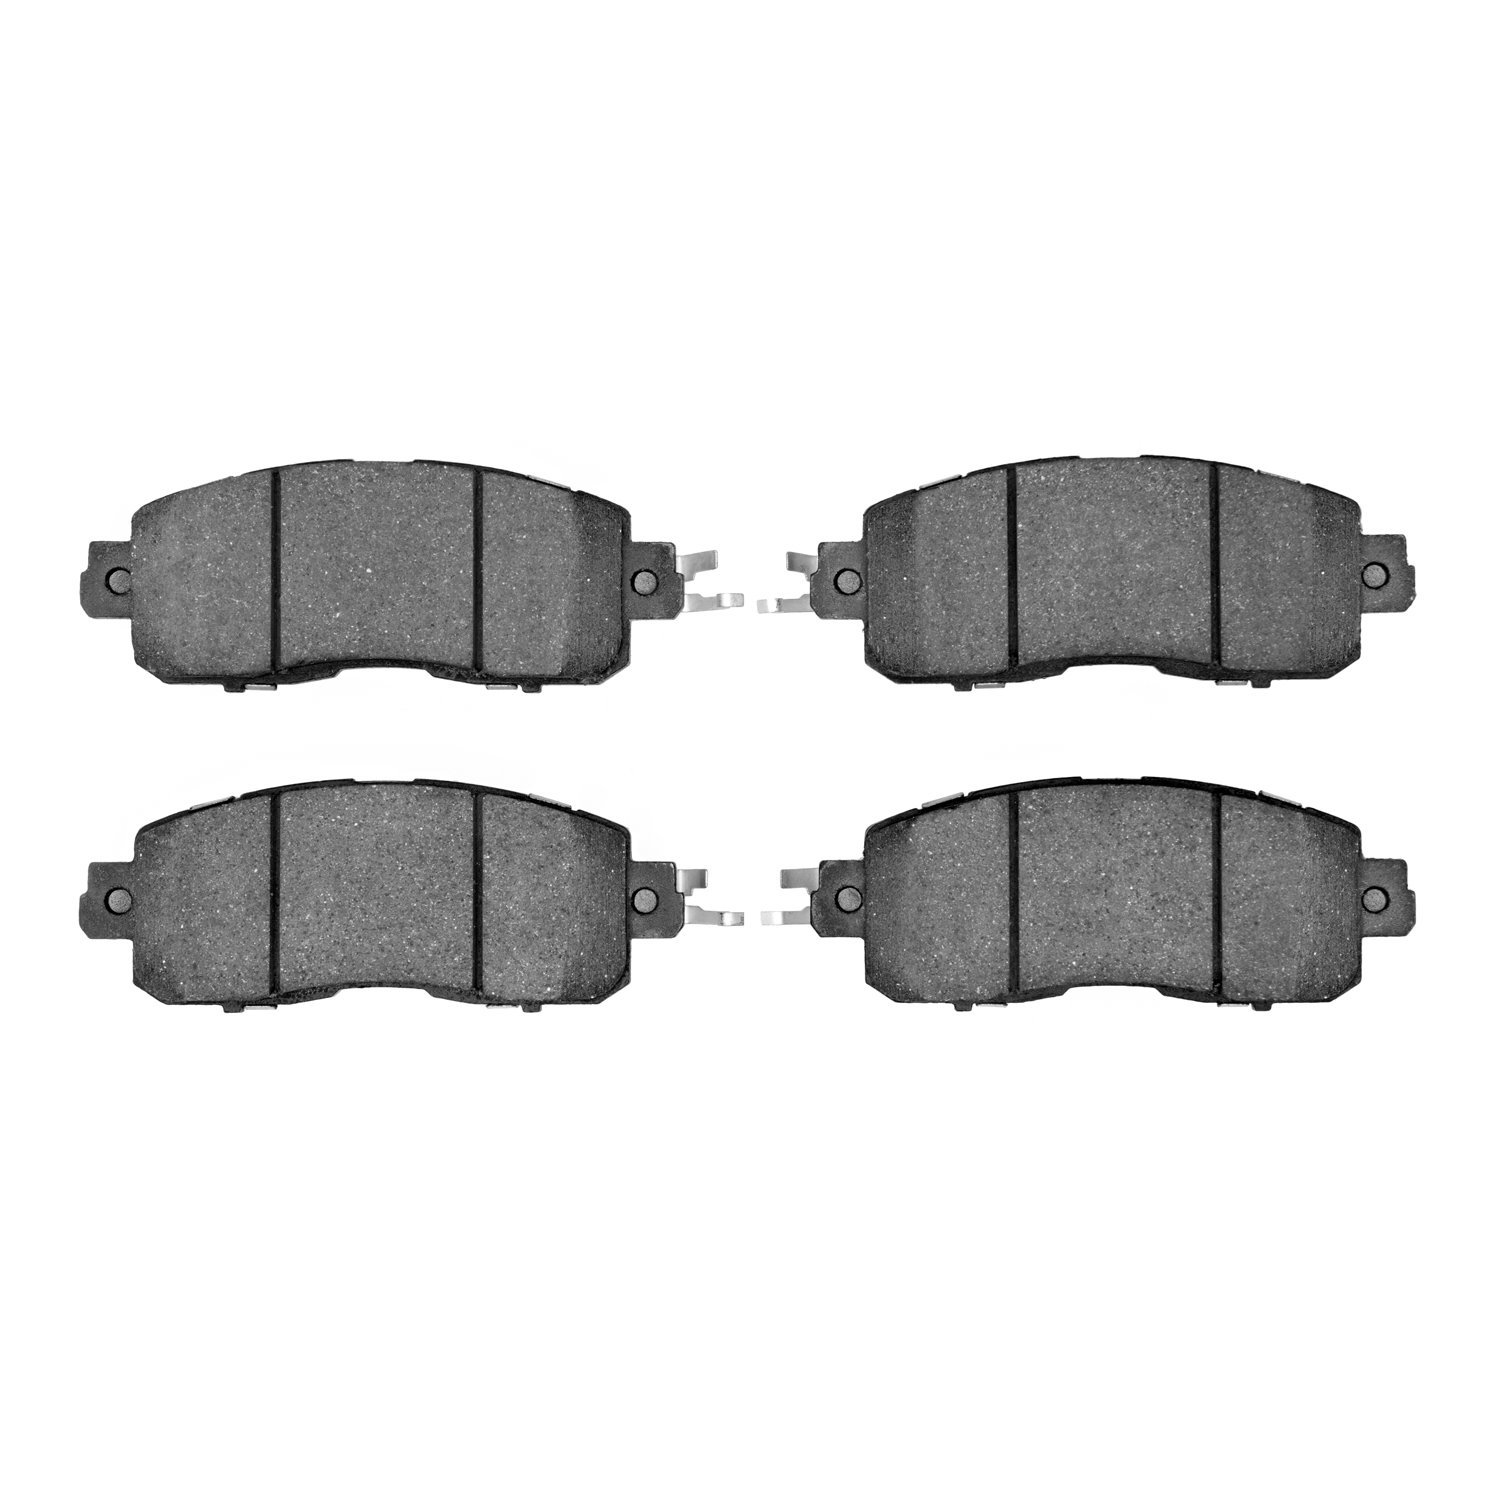 1551-1650-00 5000 Advanced Ceramic Brake Pads, Fits Select Infiniti/Nissan, Position: Front